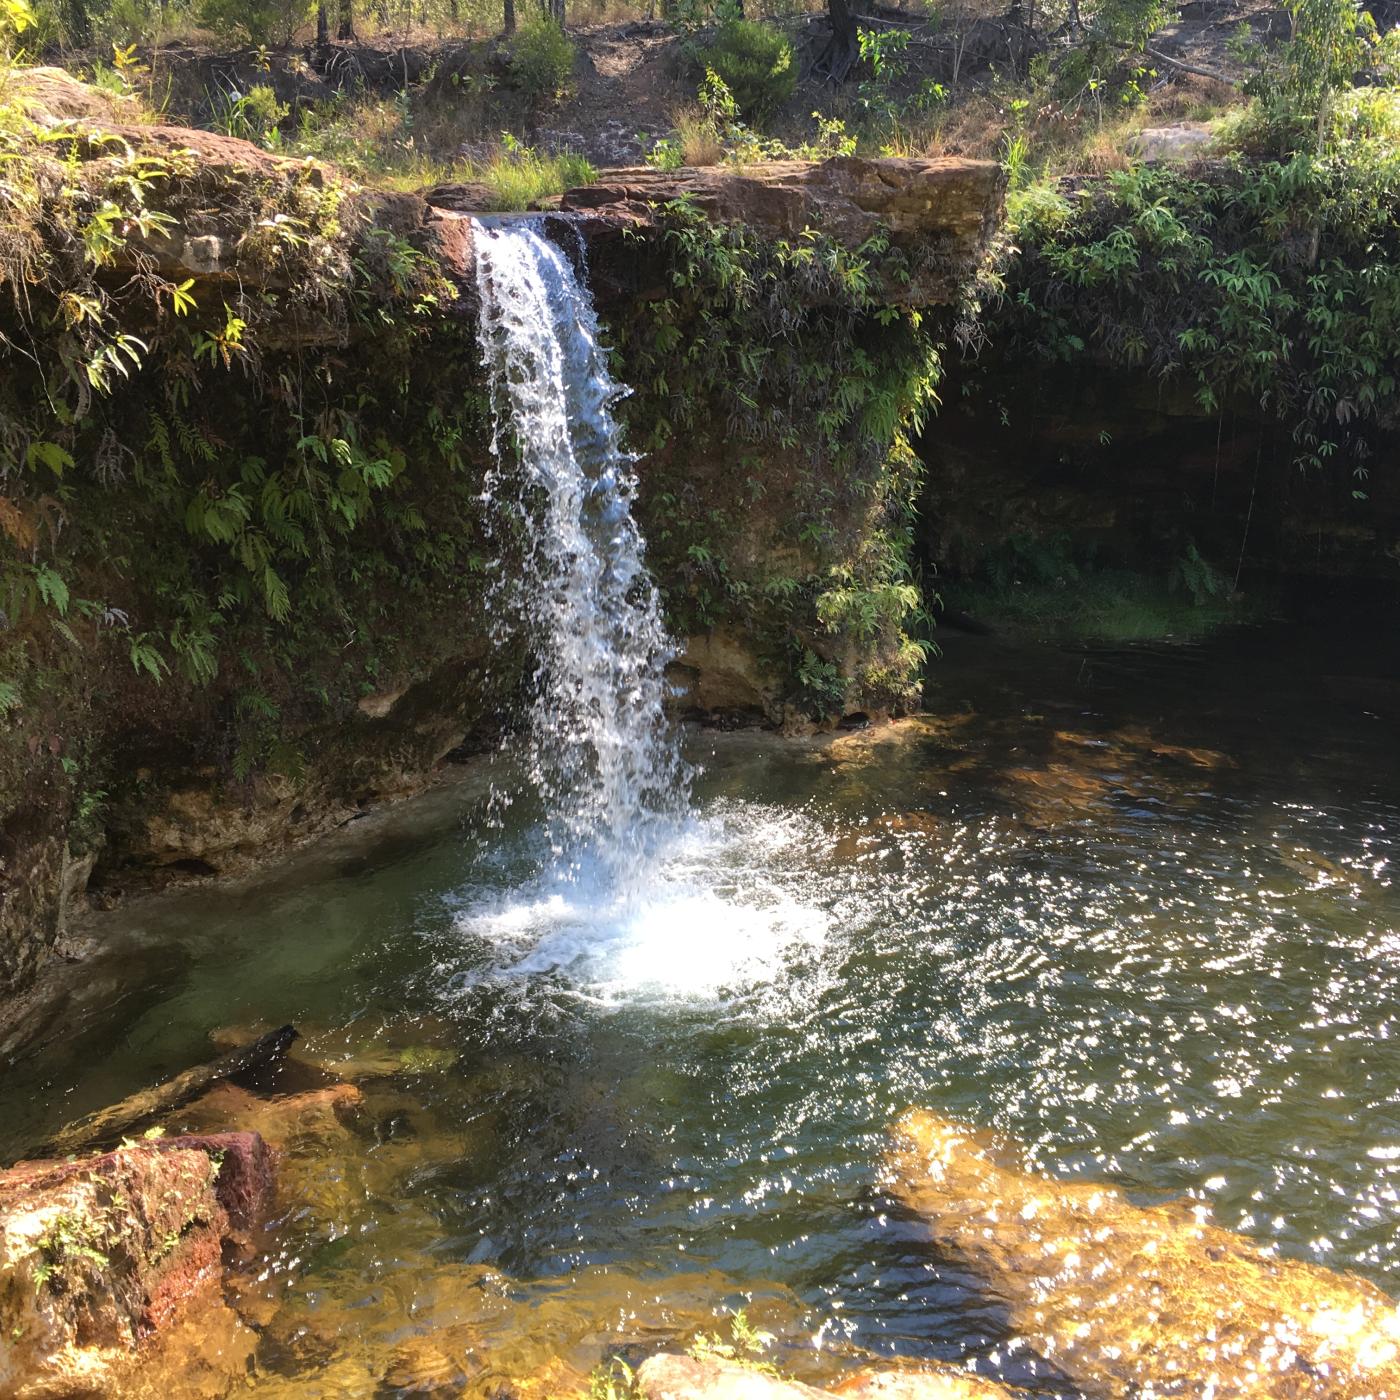 A small waterfall running into a clear pool